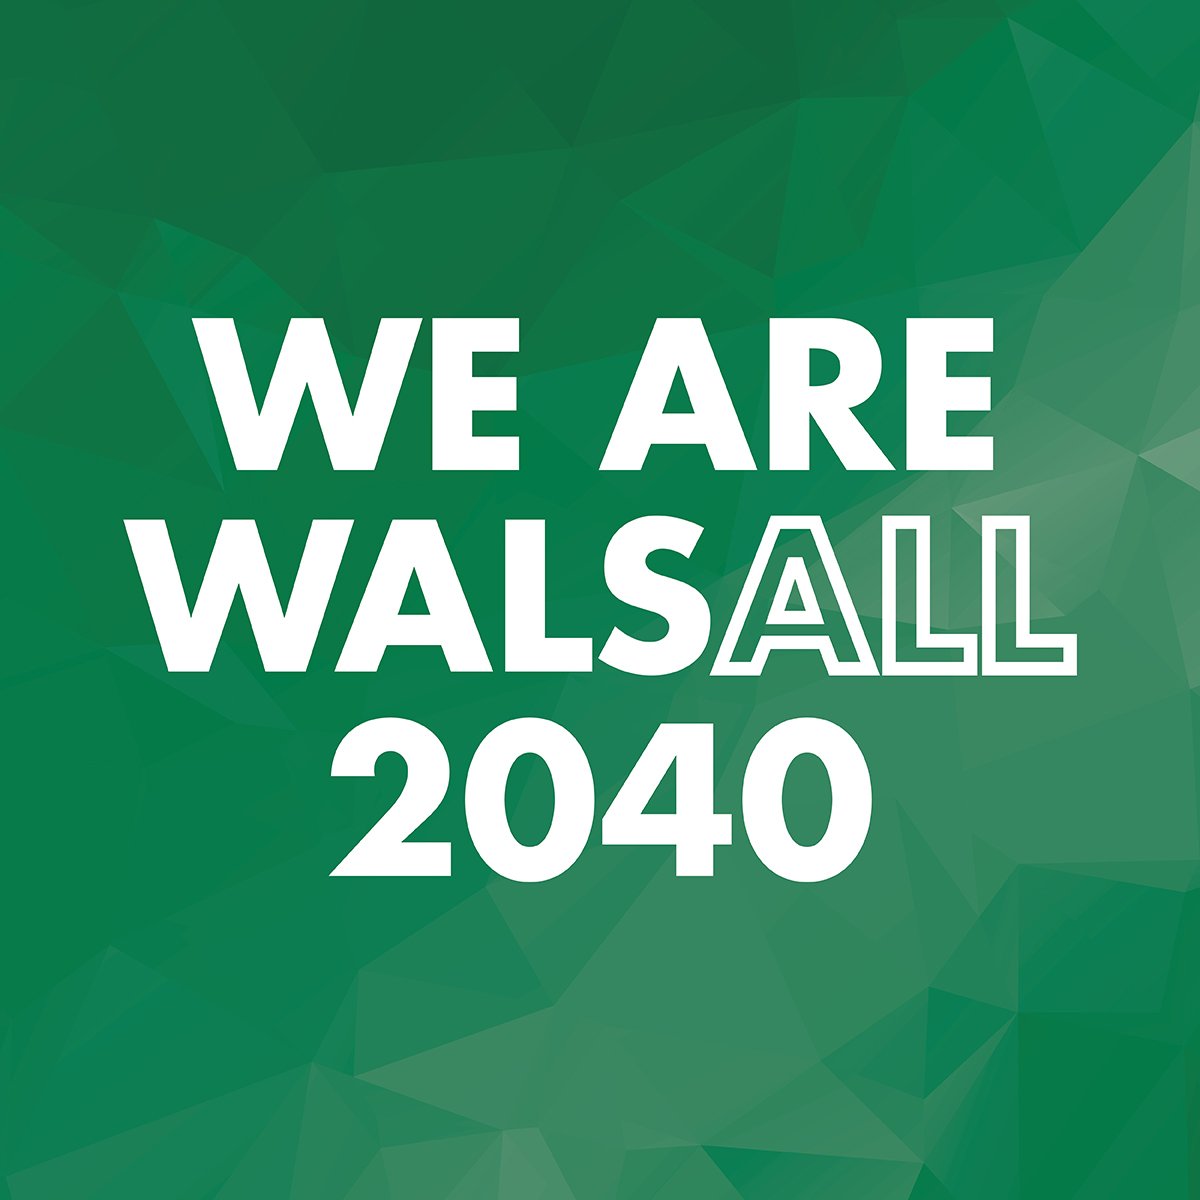 We are Walsall 2040 logo